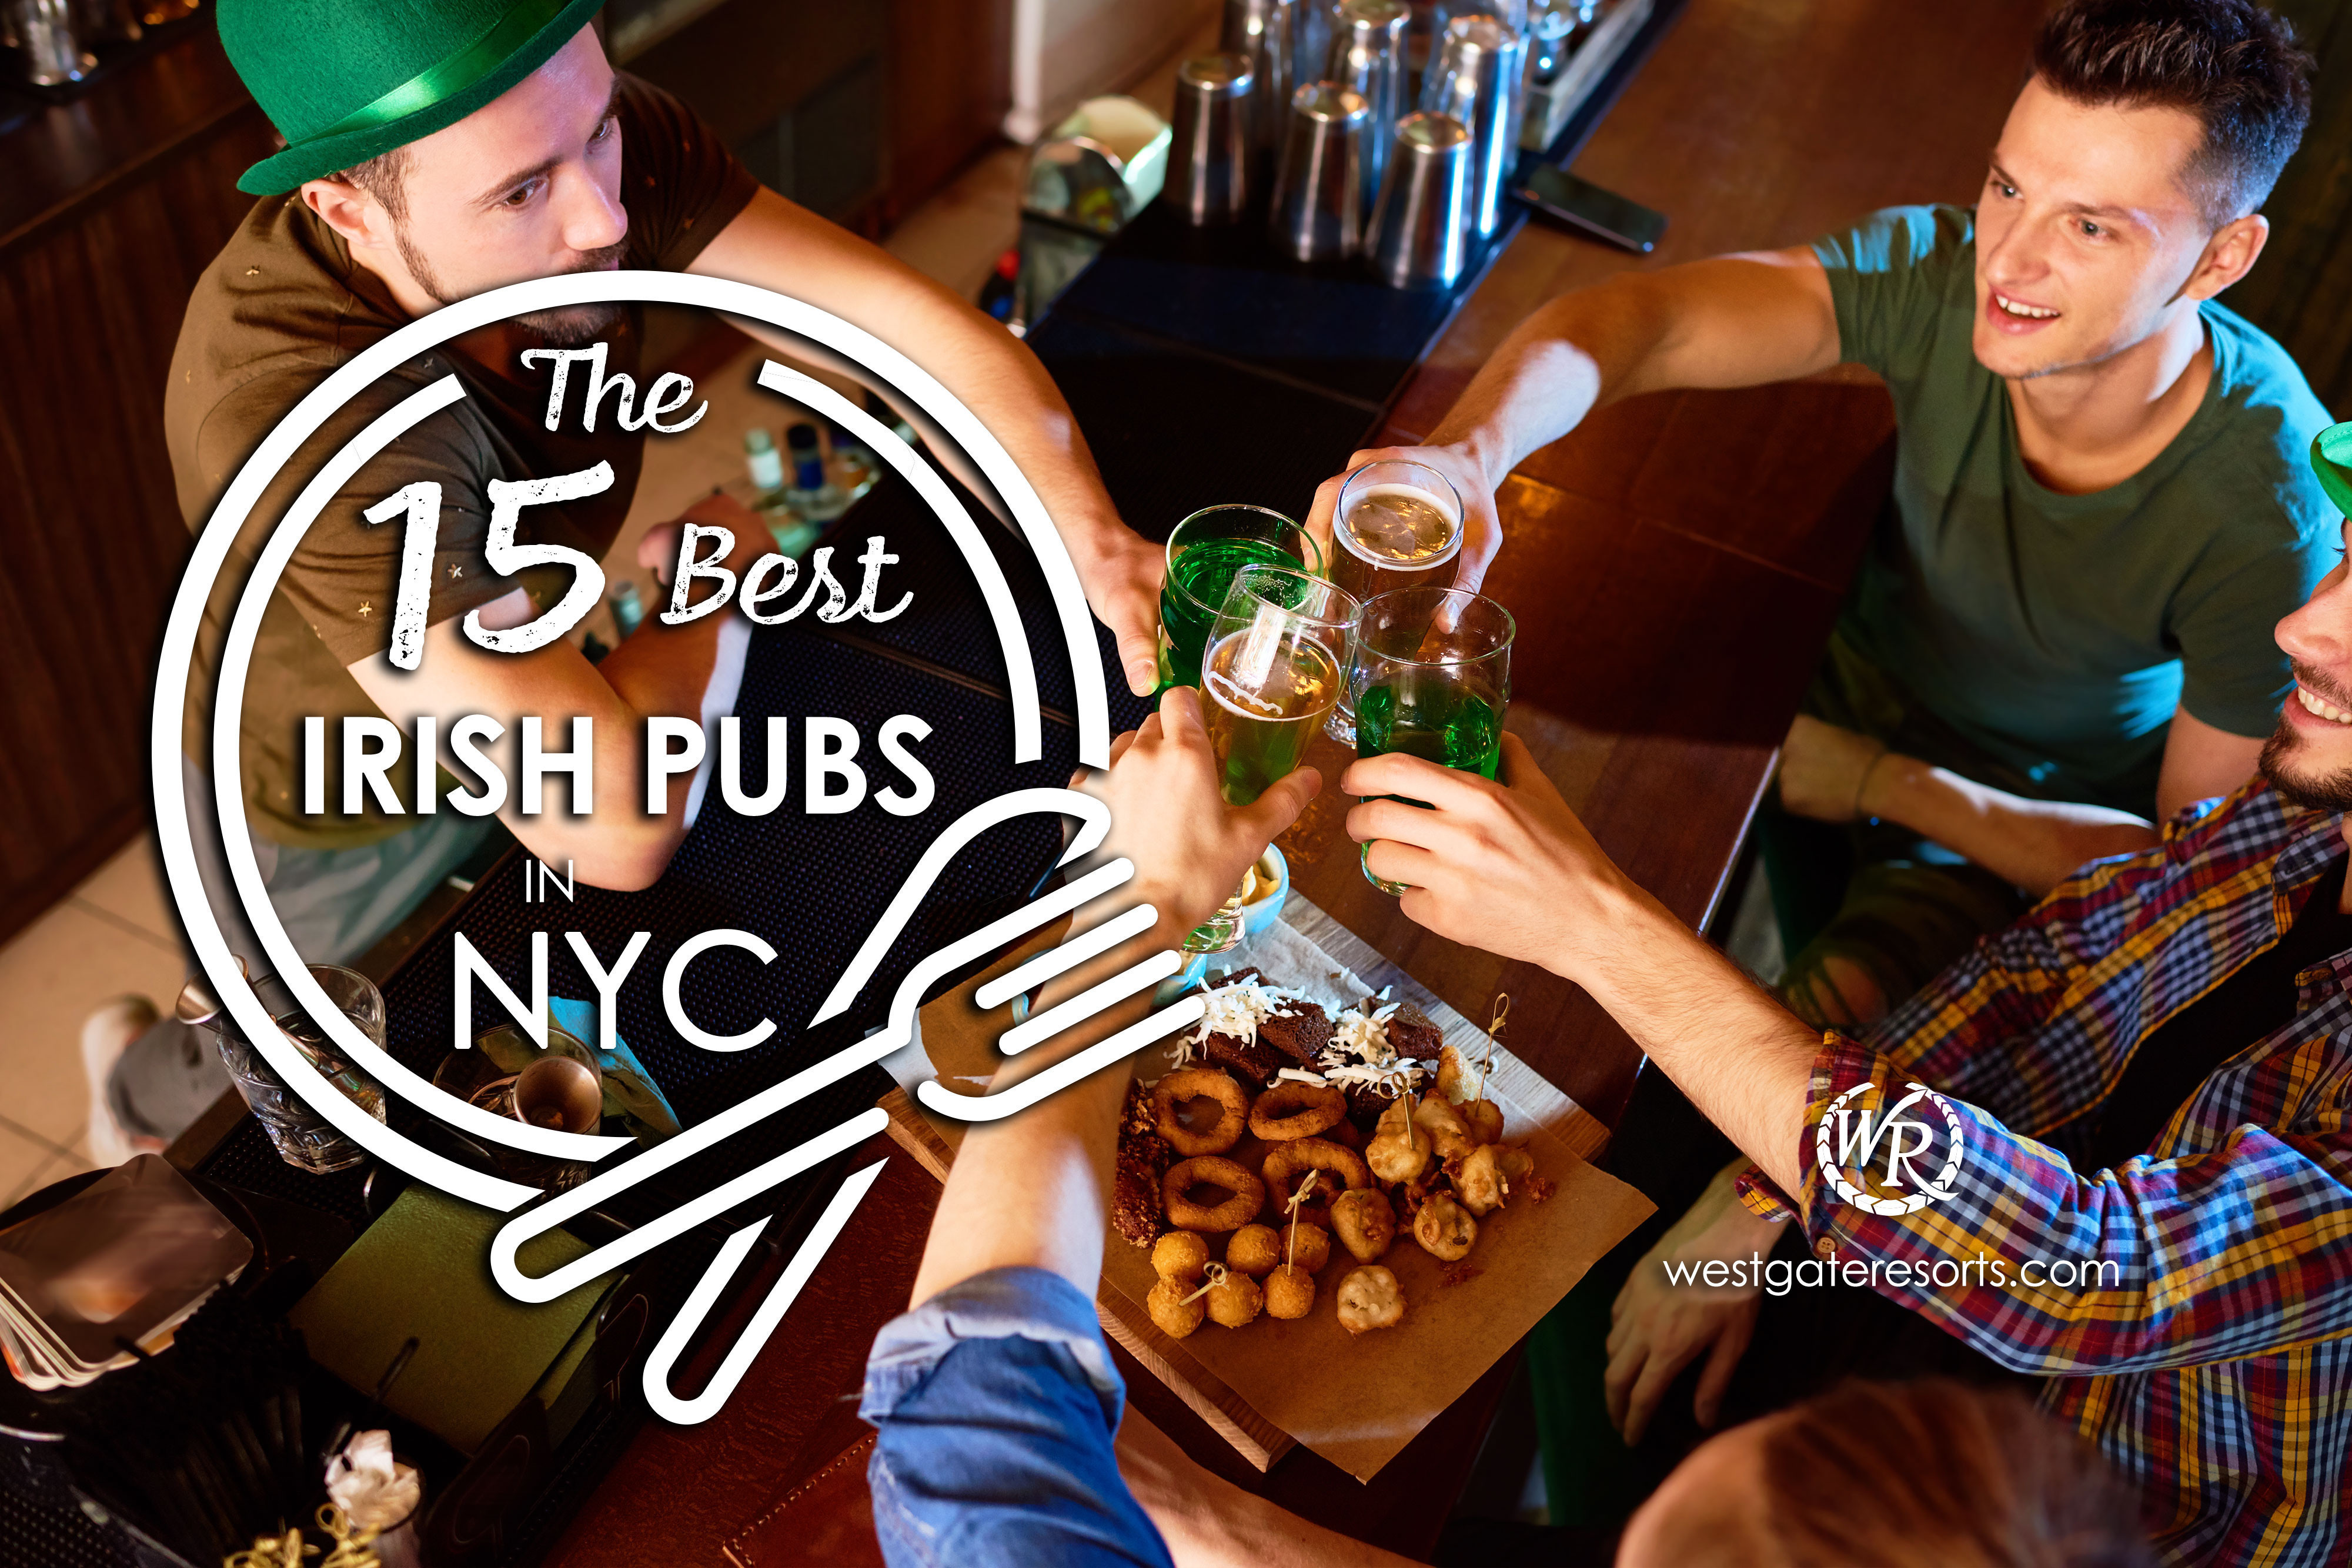 The 15 Best Irish Pubs NYC Locals Won't Tell You About